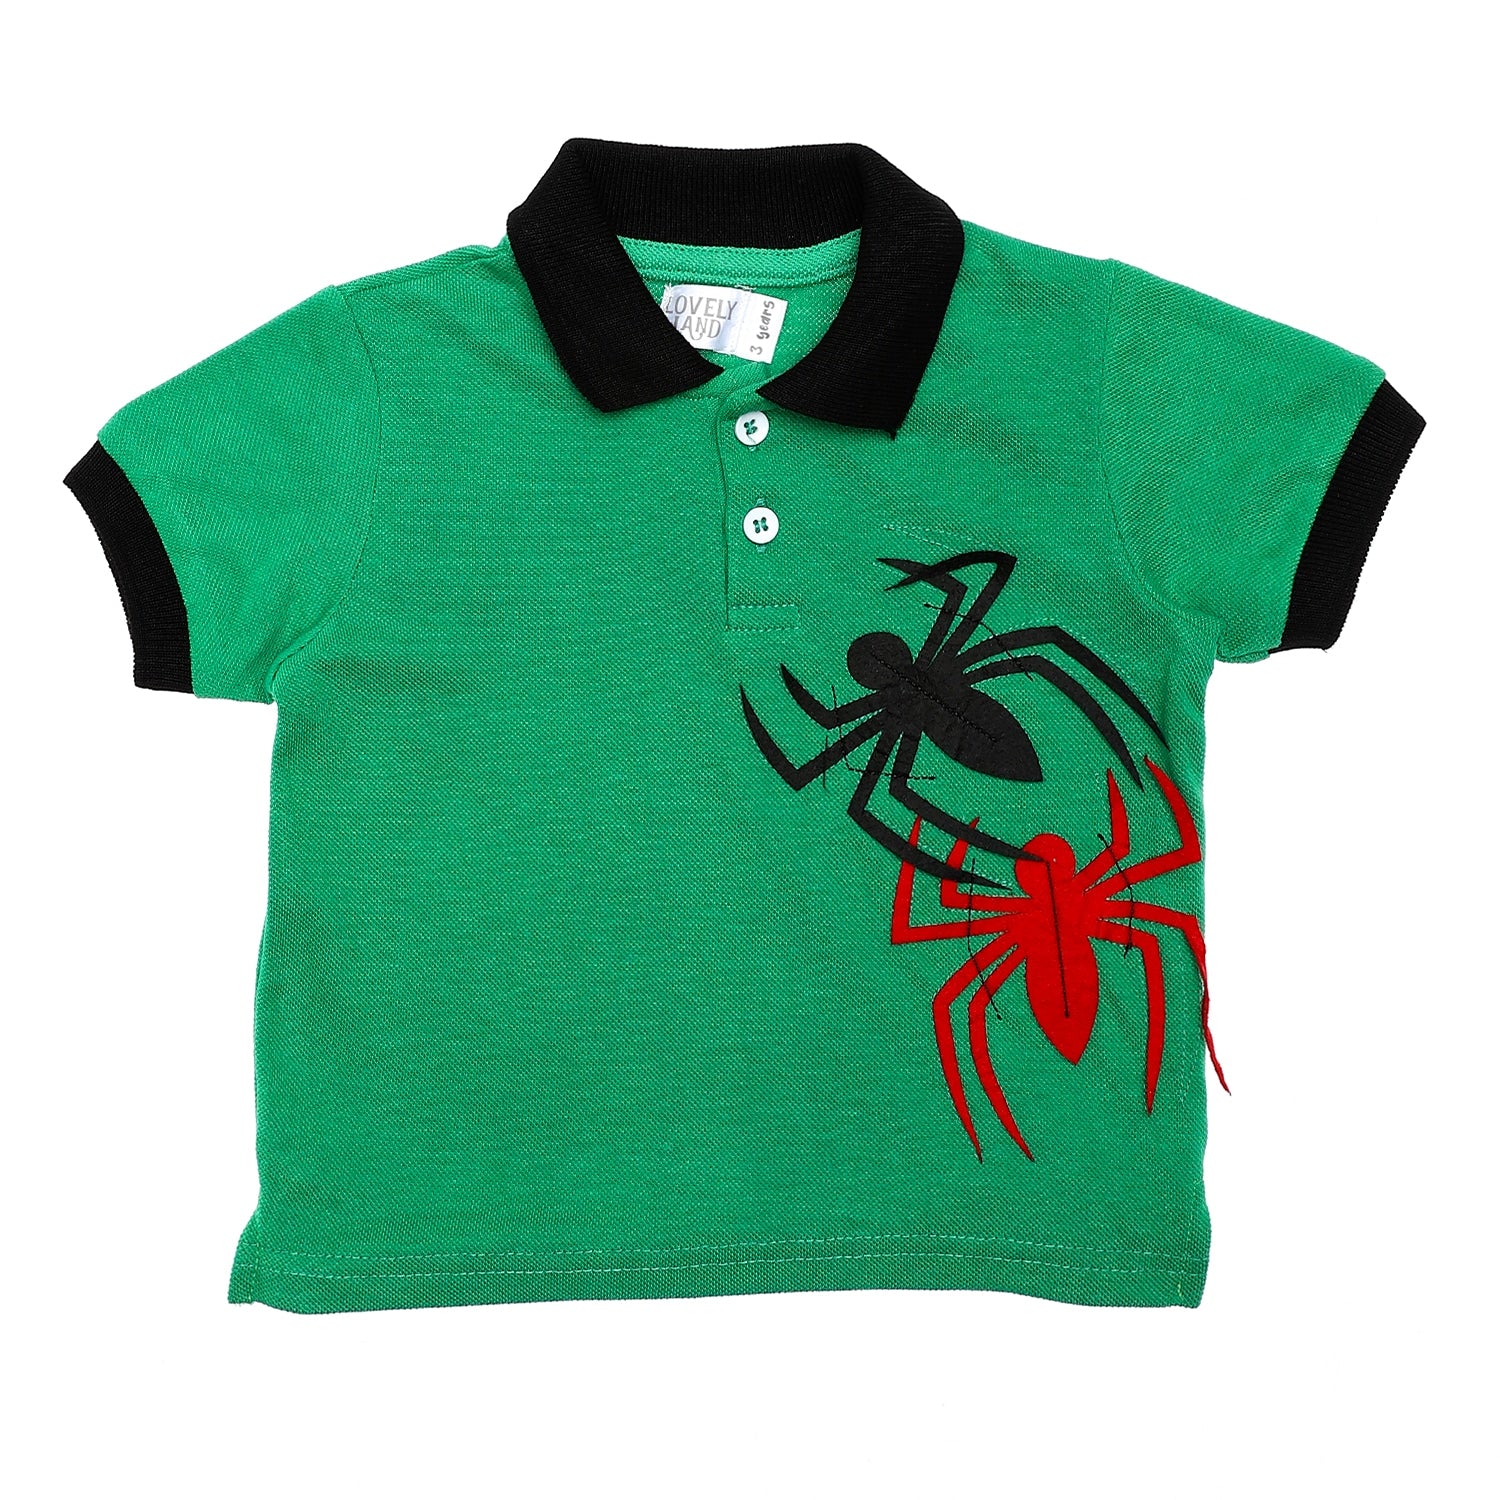 Stitched Spiderman Patch Green, Red & Black Baby Boys Polo Shirt